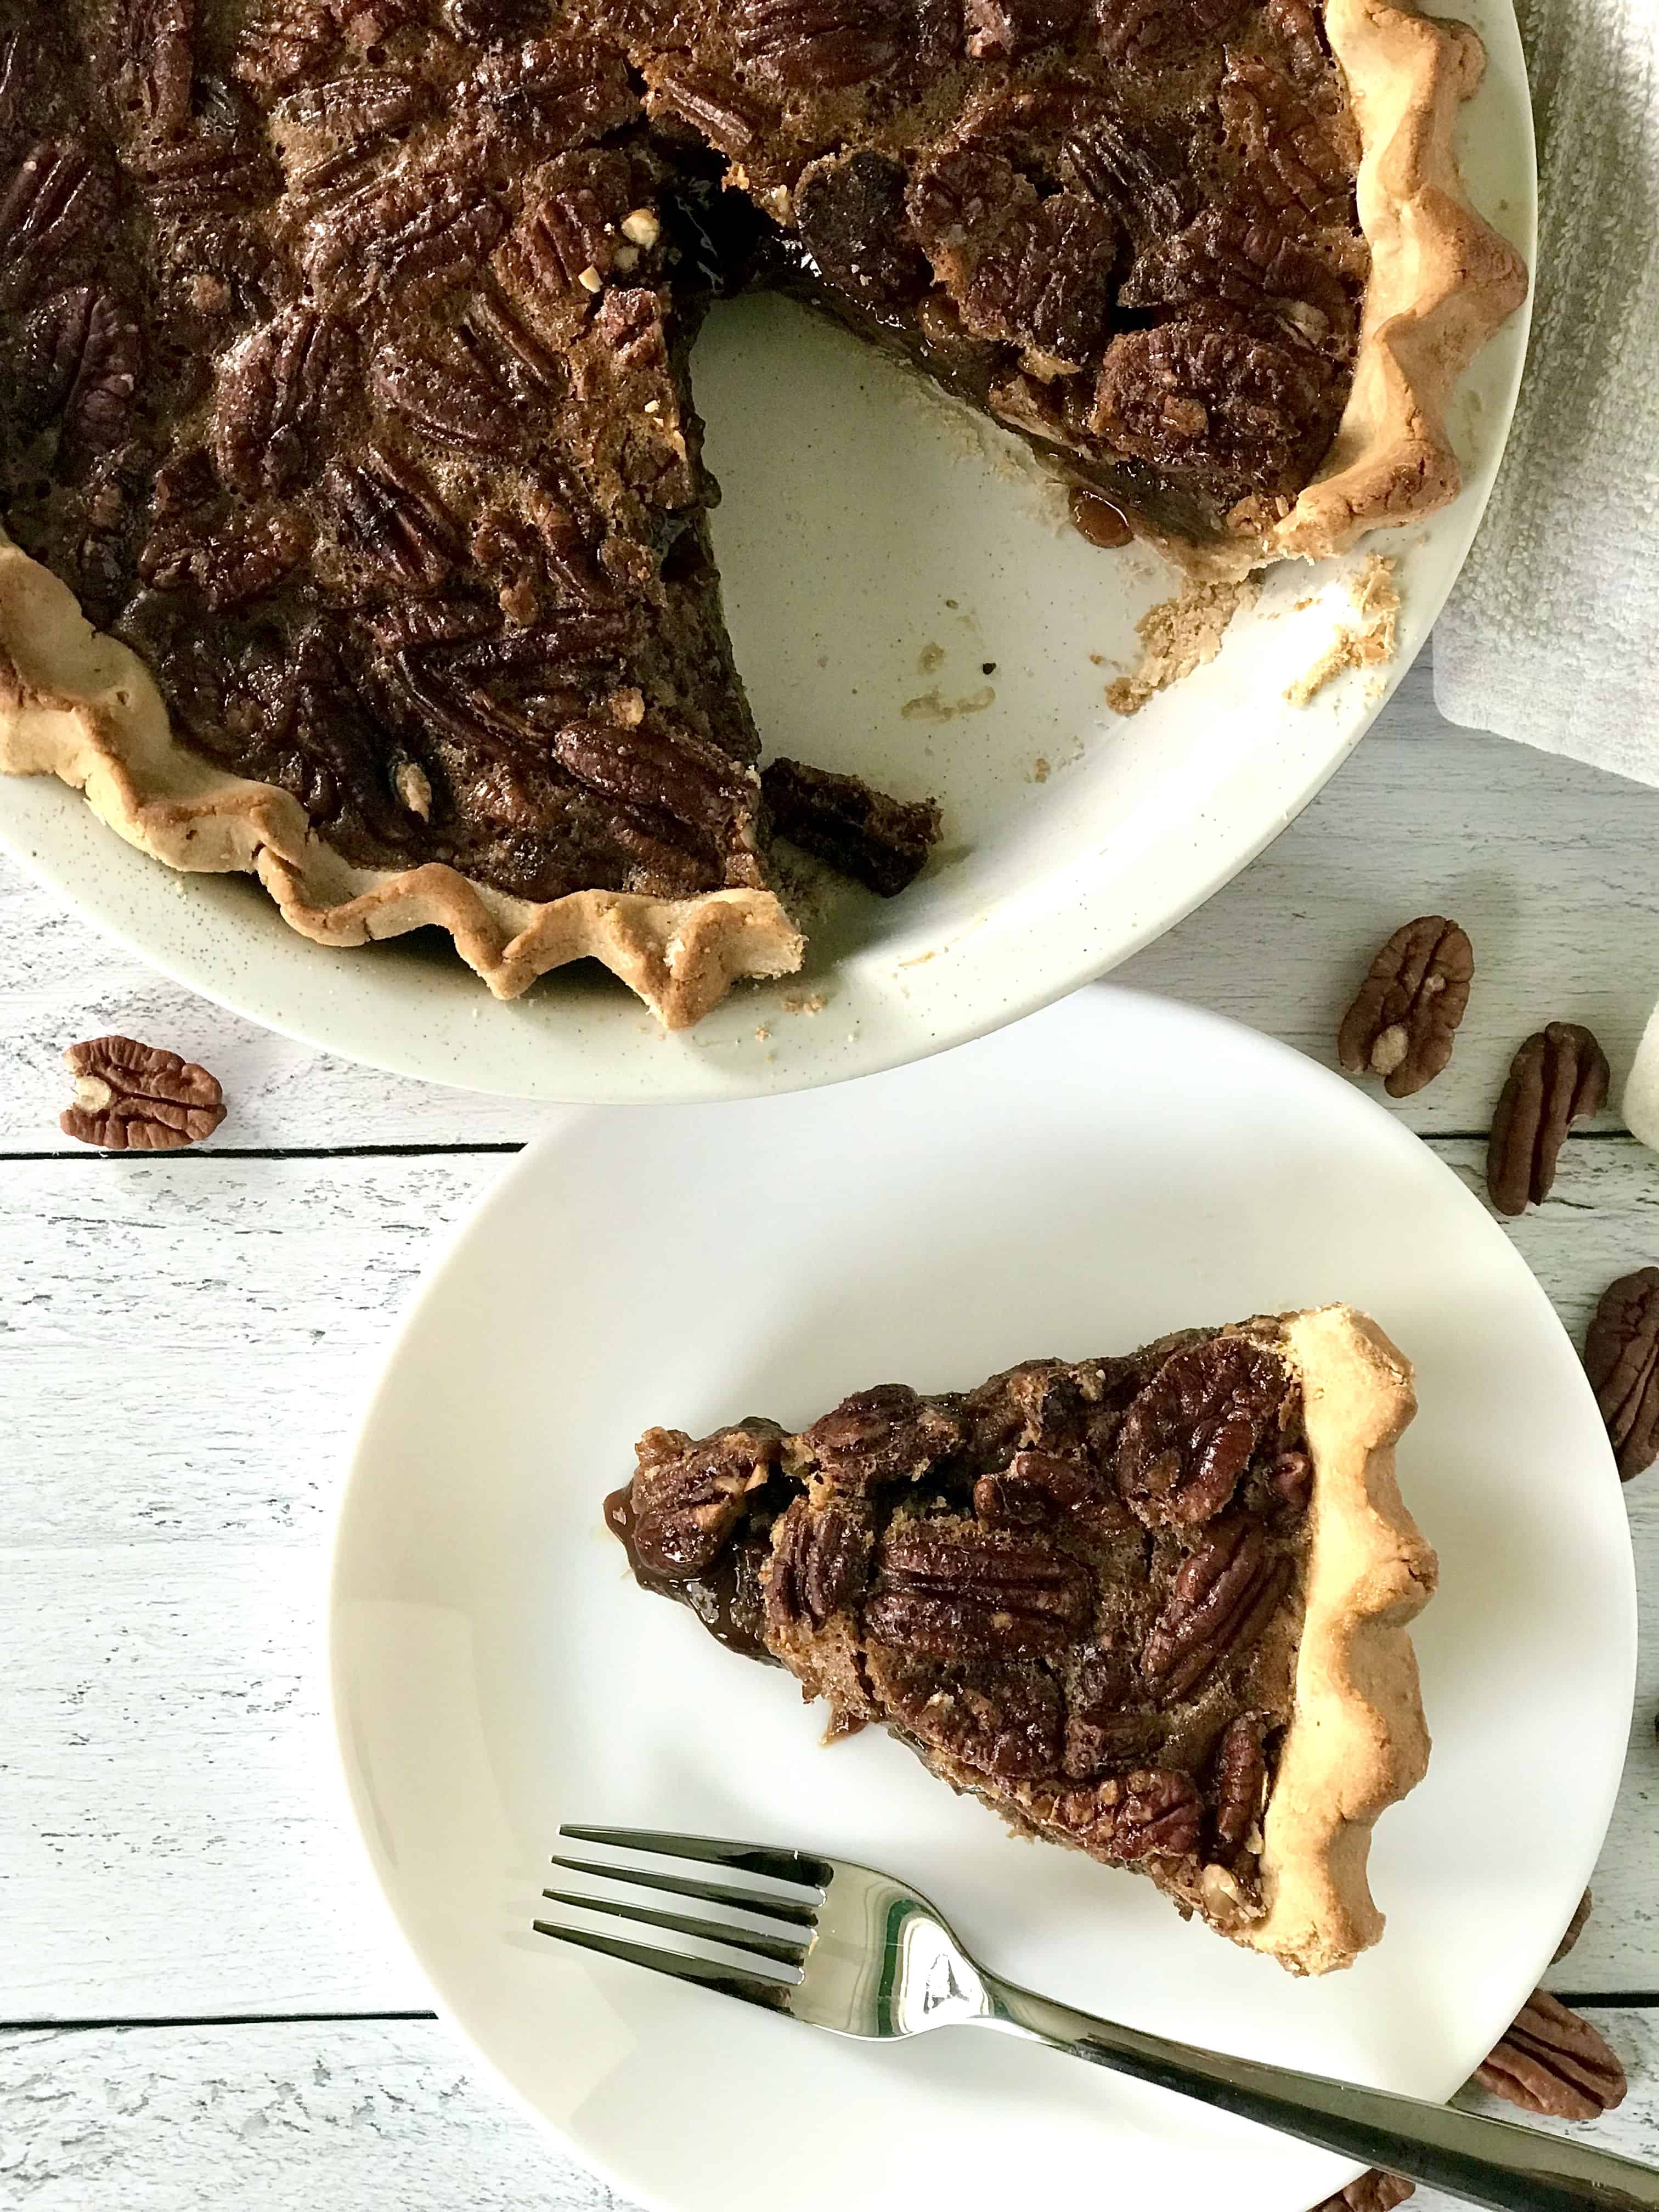 Gluten-free pecan pie in a pie dish with a slice missing and the slice on a white plate with a fork.